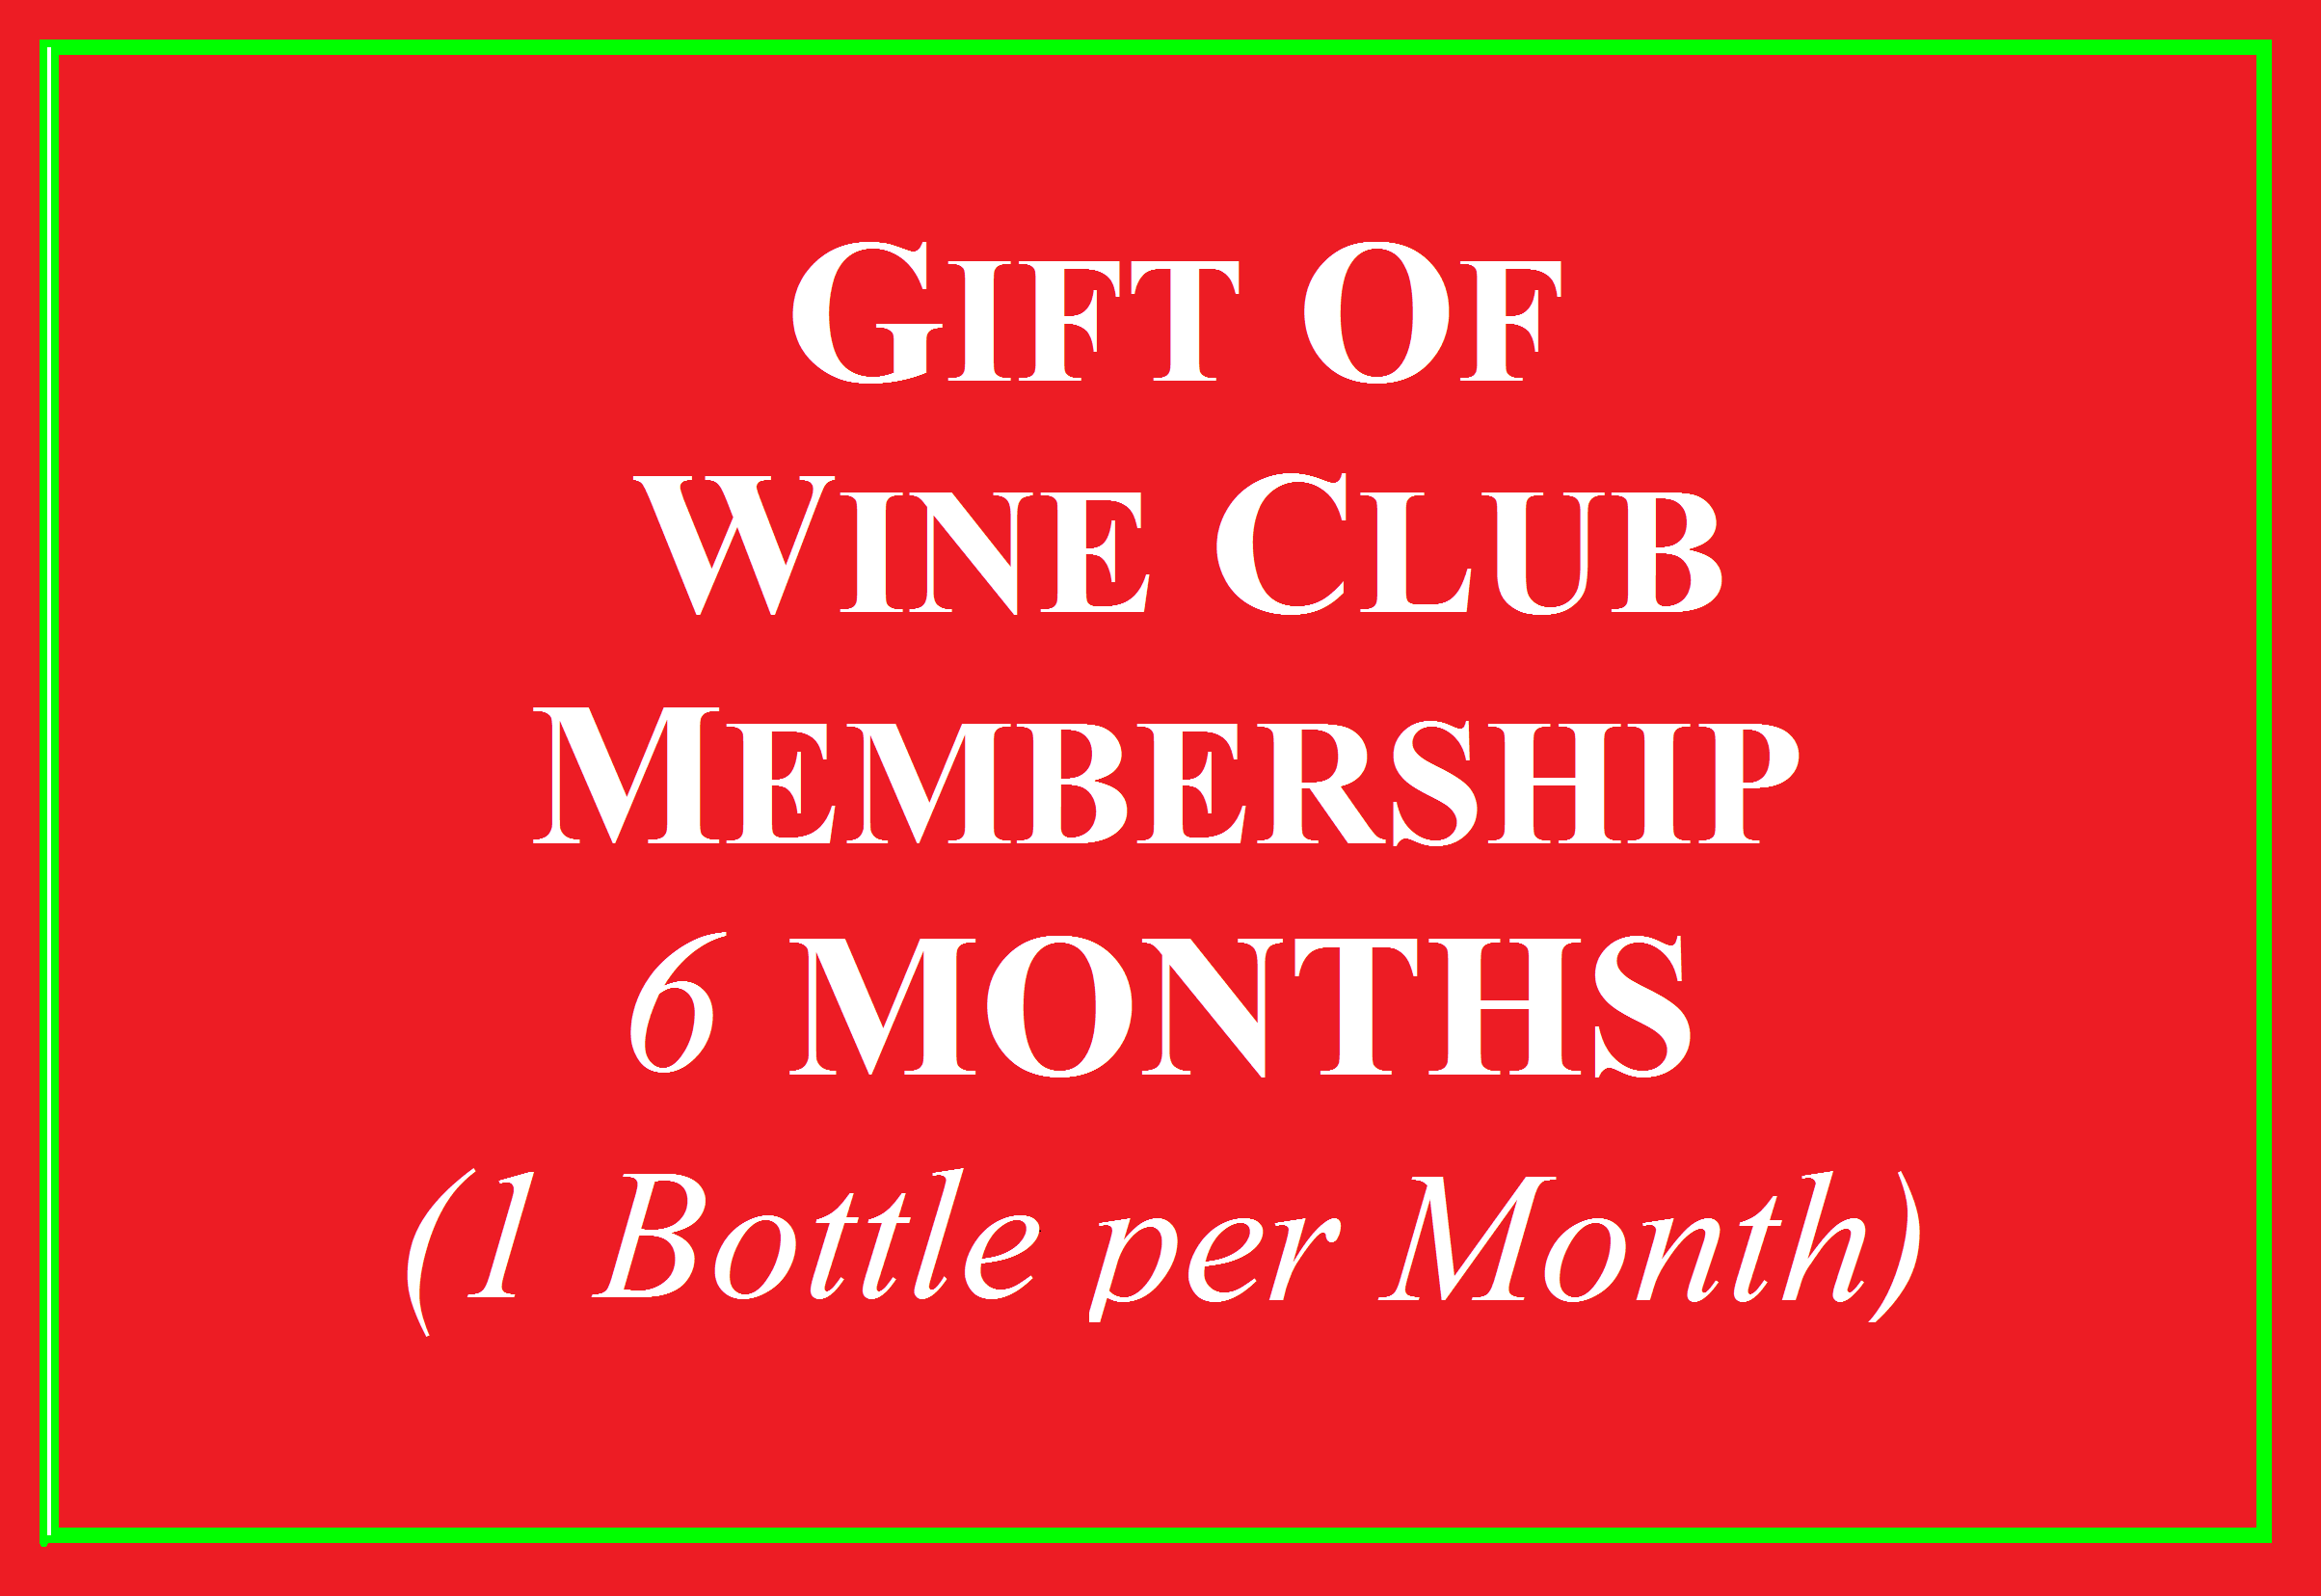 Wine Club Gift for 6 Months 1 Bottle